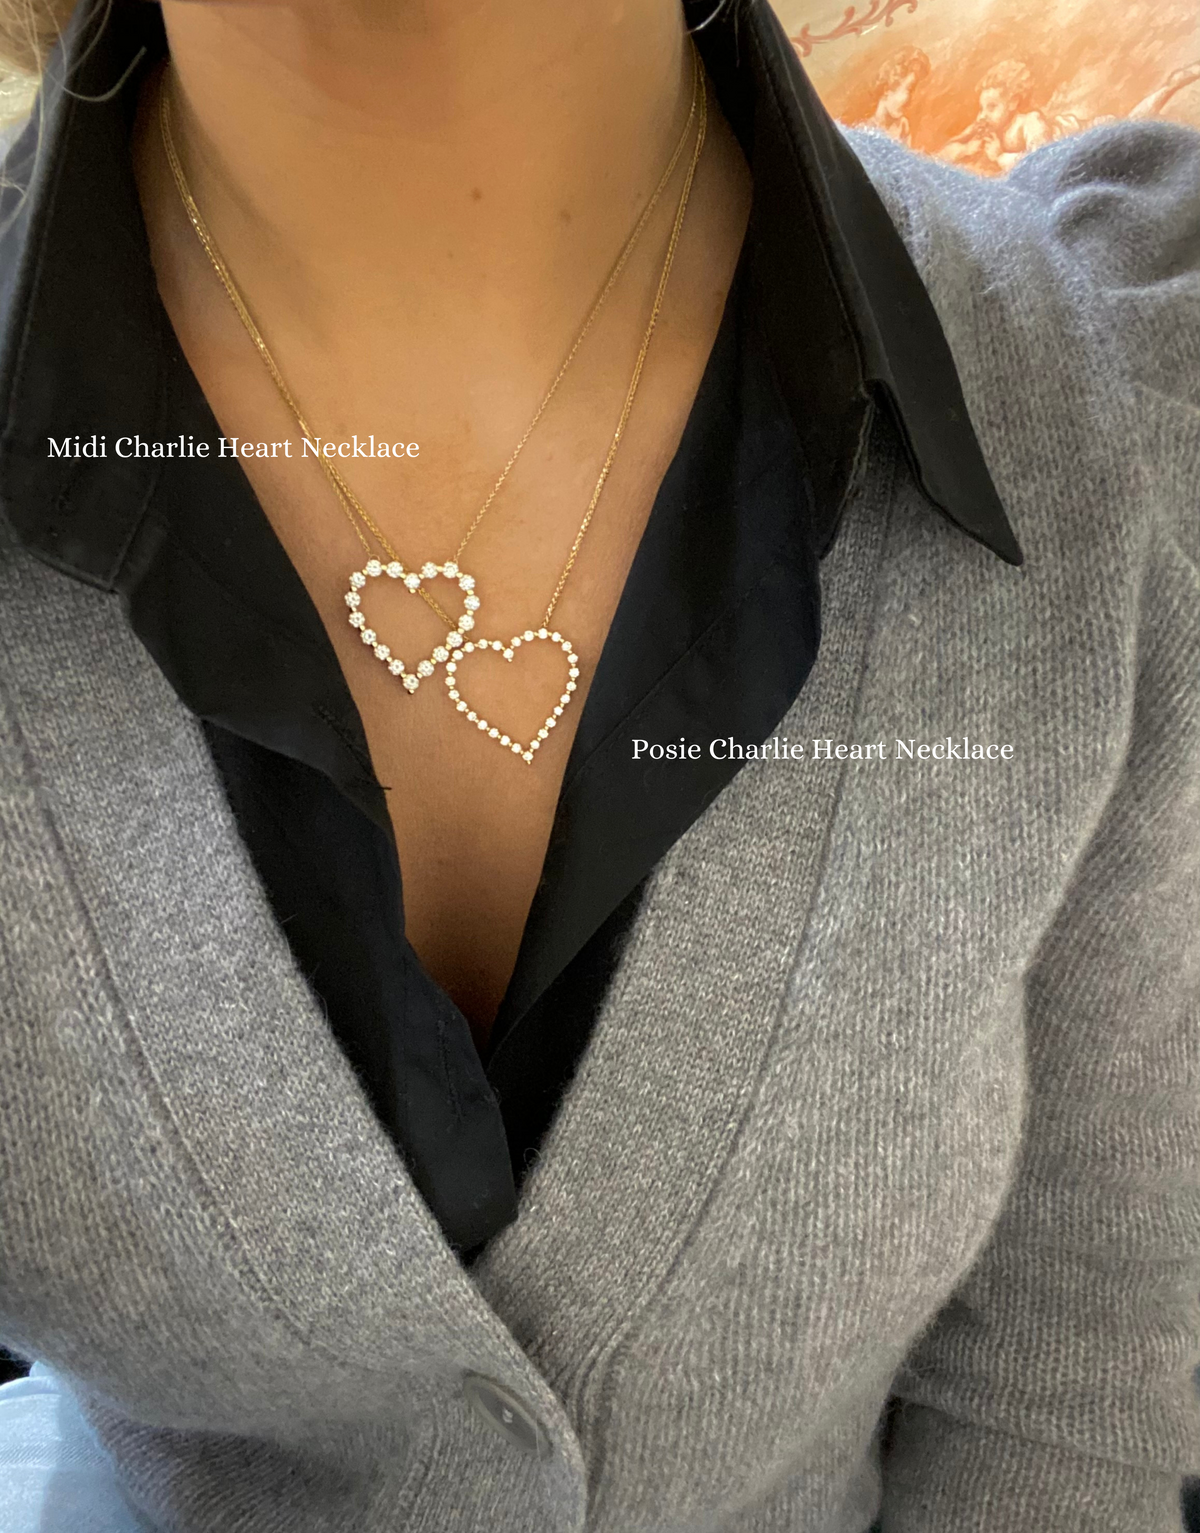 Midi Charlie Floating Diamond Heart Necklace 2.16 CTW | RW Fine Jewelry 14K White Gold / Laboratory Grown Diamonds / 18 Inches with Jump Rings at 16